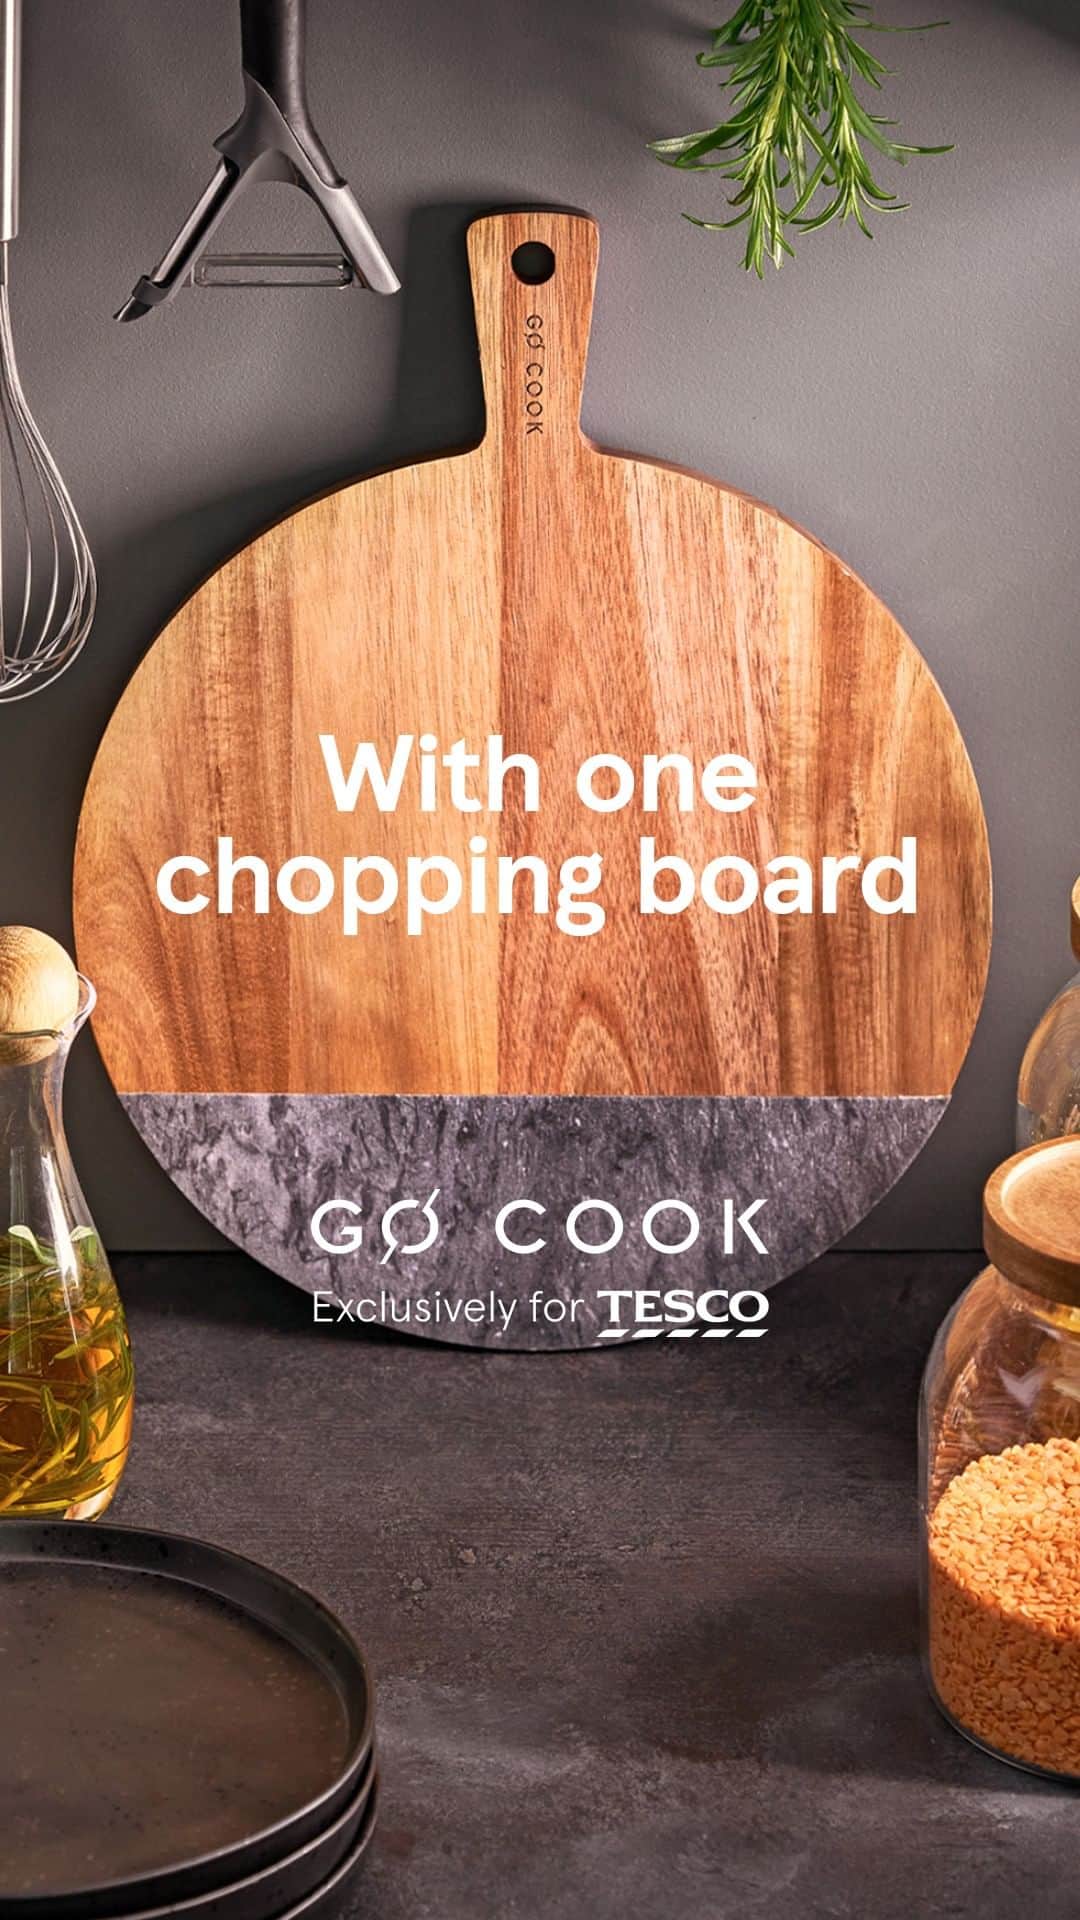 Tesco Food Officialのインスタグラム：「Chop, slice, serve, repeat. This versatile paddle board does it all and works as a stylish centrepiece for your dining table. Head to the link in bio to shop the full Go Cook range.」